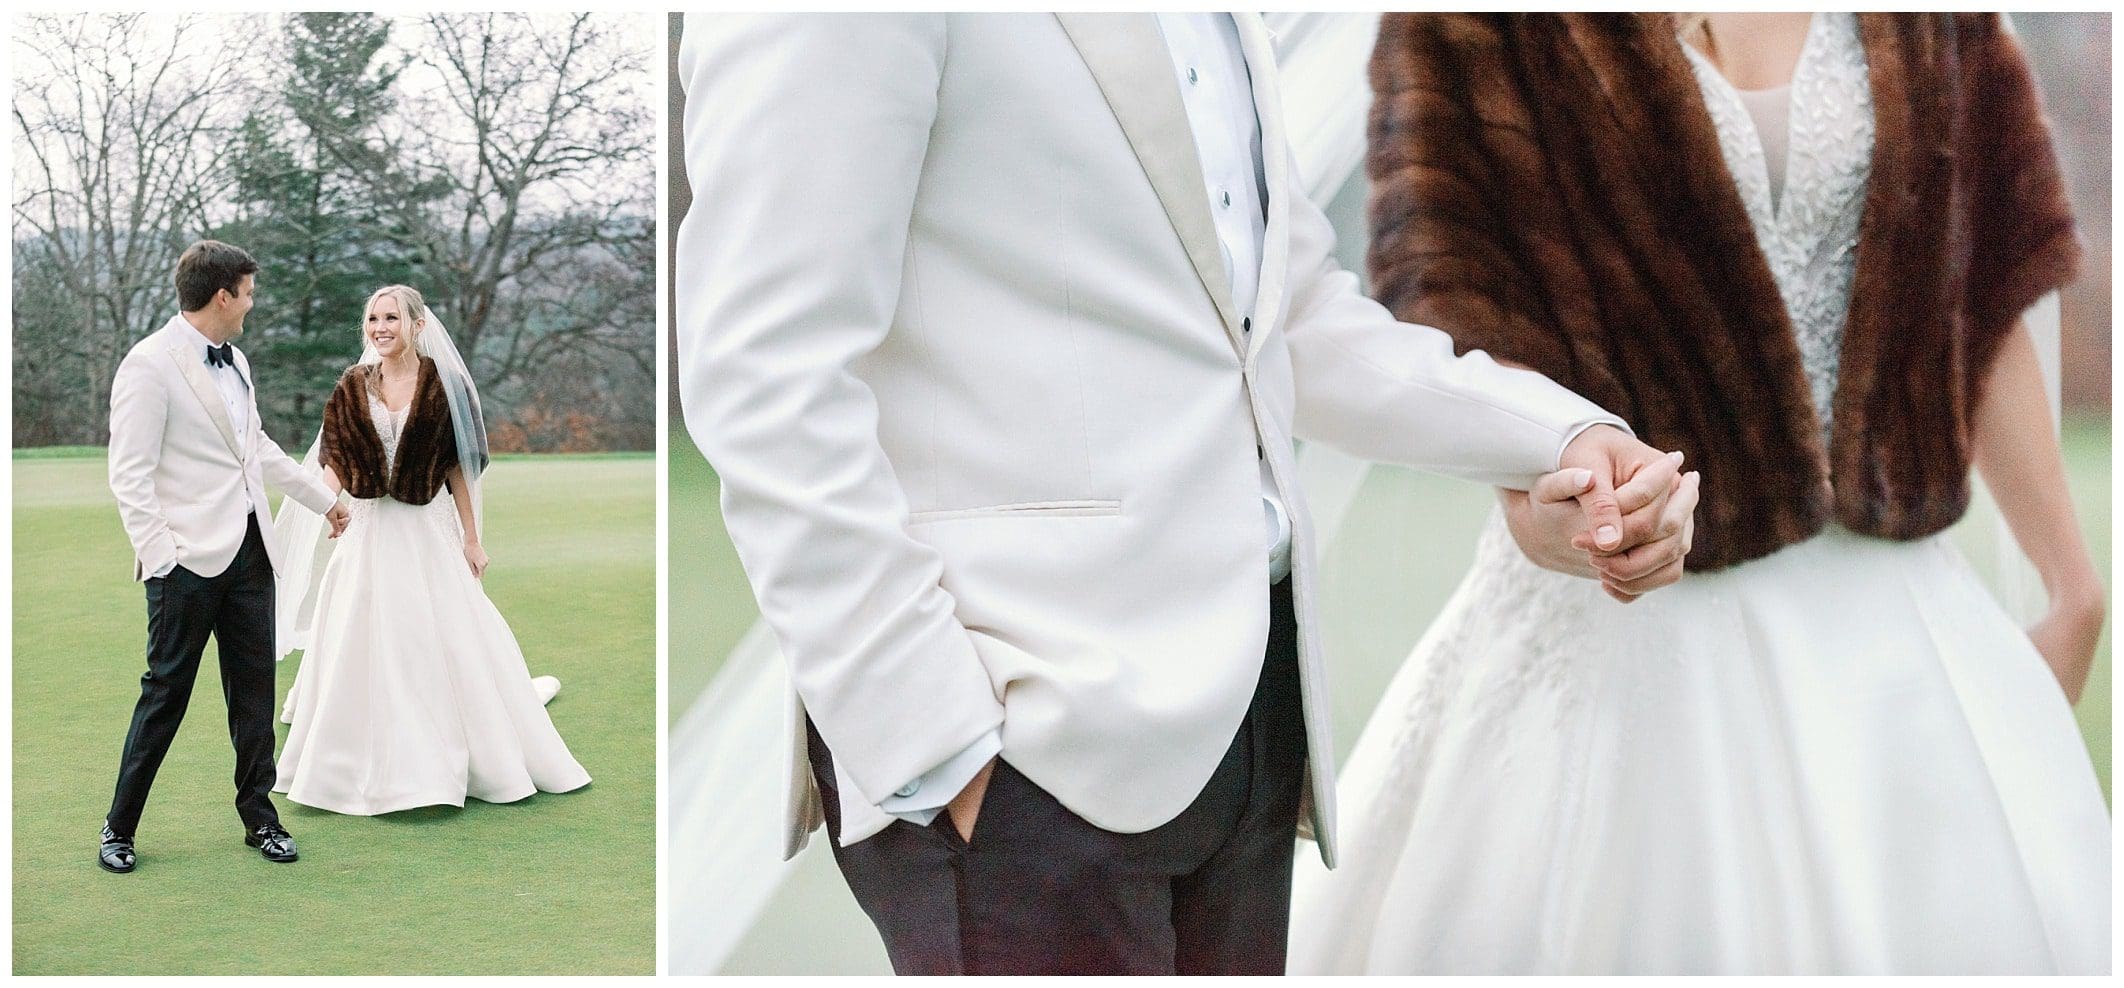 bride and groom walk together on golf course